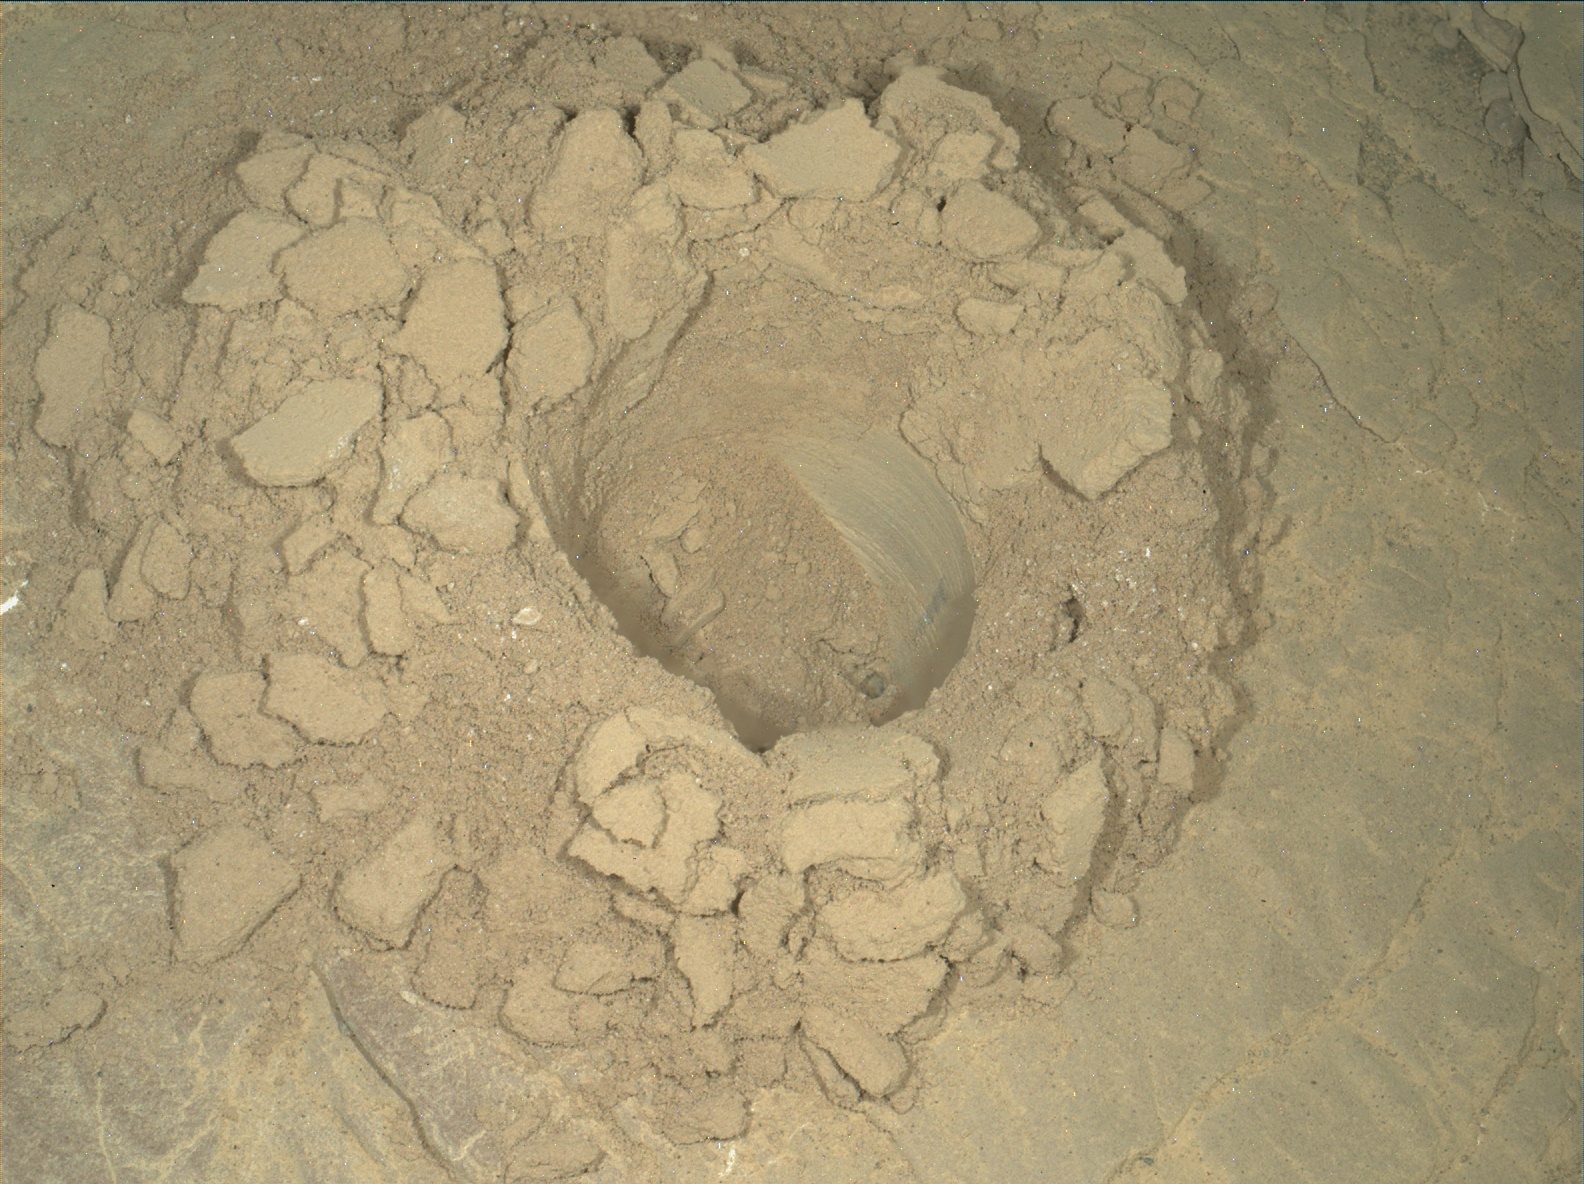 Sol 2531 - 2532: Three Portions to Inlet 1 and Straight on till SAM